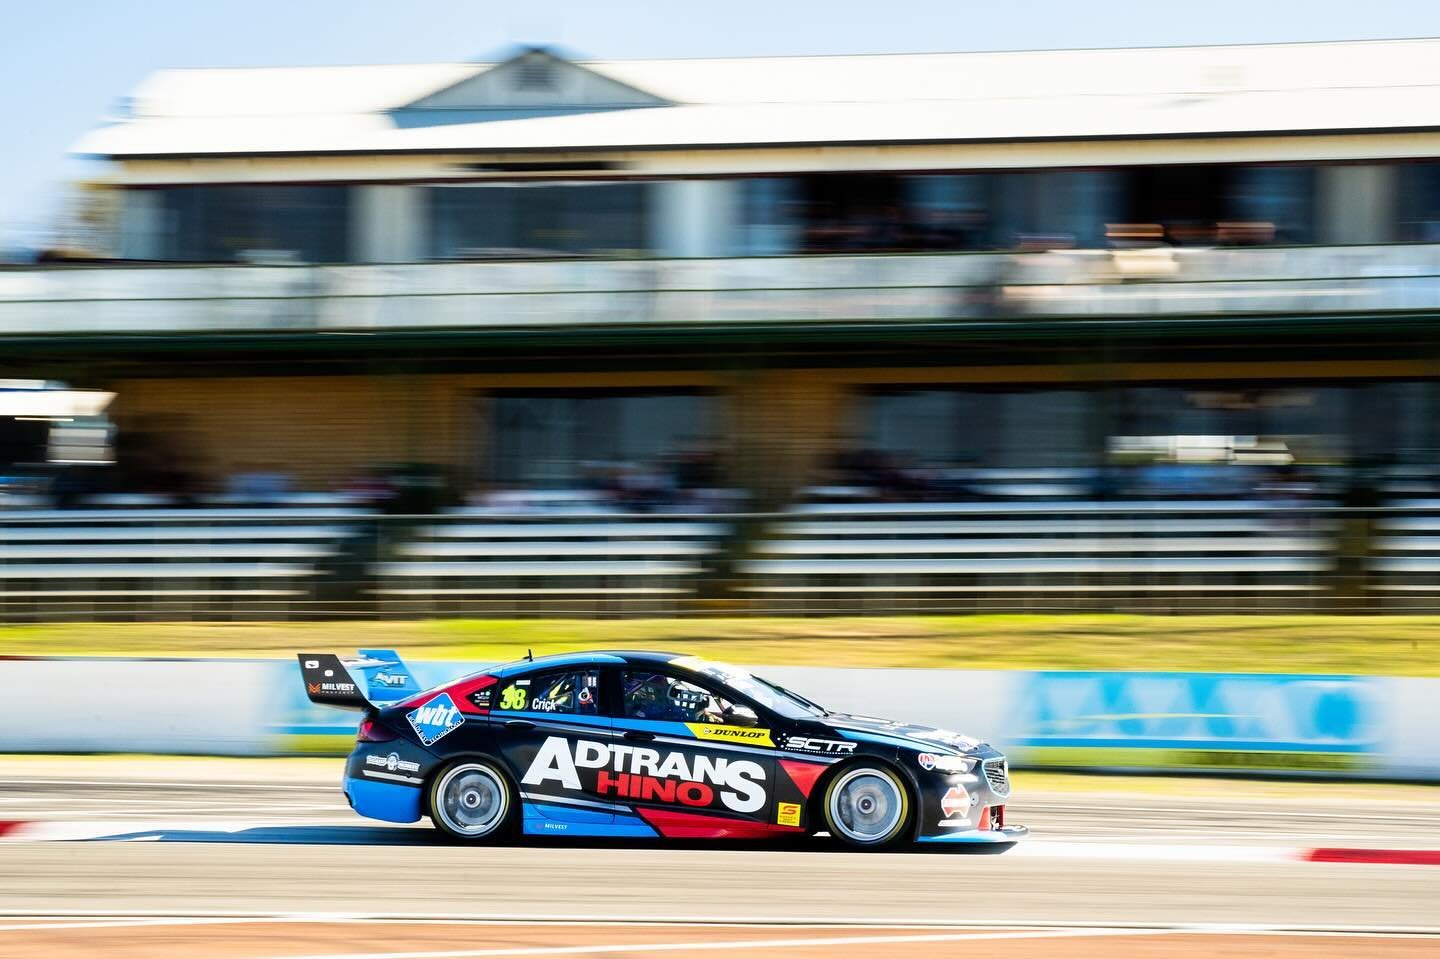 Day 1 in Perth! 🤠
Car was good in today&rsquo;s Practice!
Finished up P1 and P5 across both sessions.
Qualifying and Race 1 coming up tomorrow! 🏁

@adtranshino - @wbt_racing - @proaxle_australia @southern_crosstruckrentals - @theavitgroup - @dormer